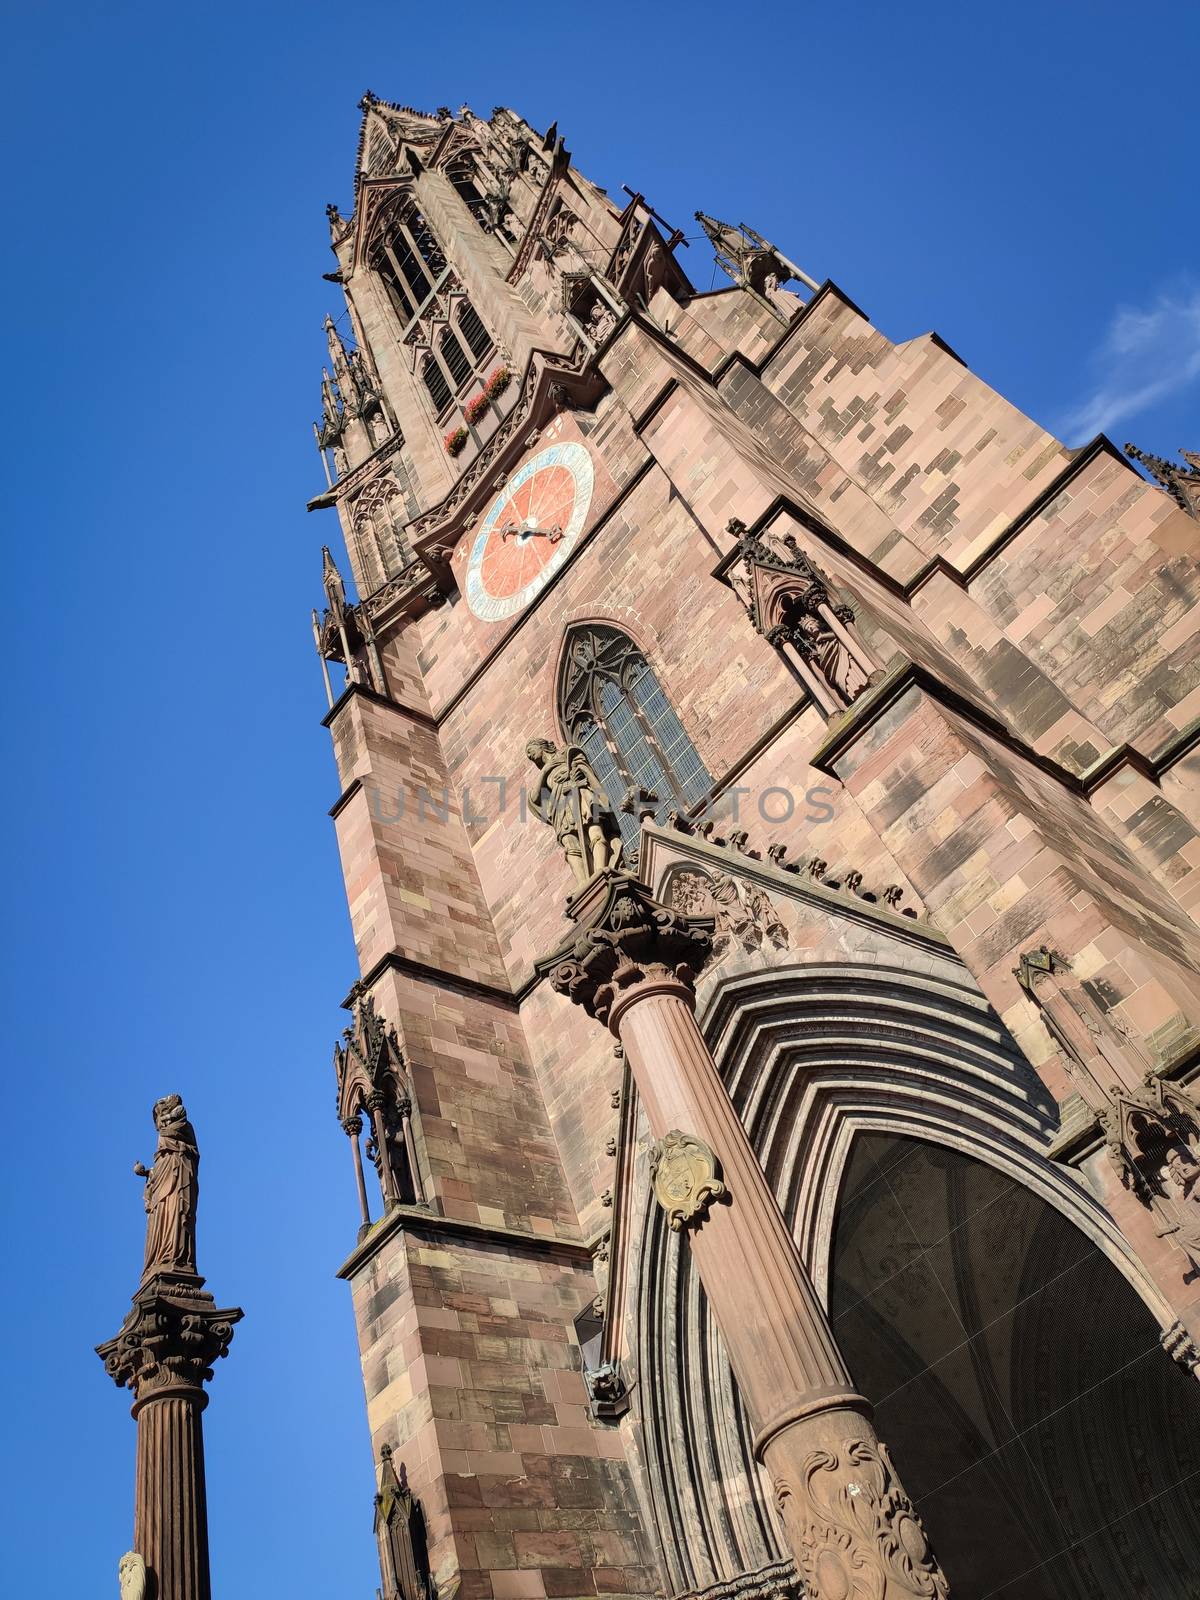 An image of the cathedral in Freiburg Germany